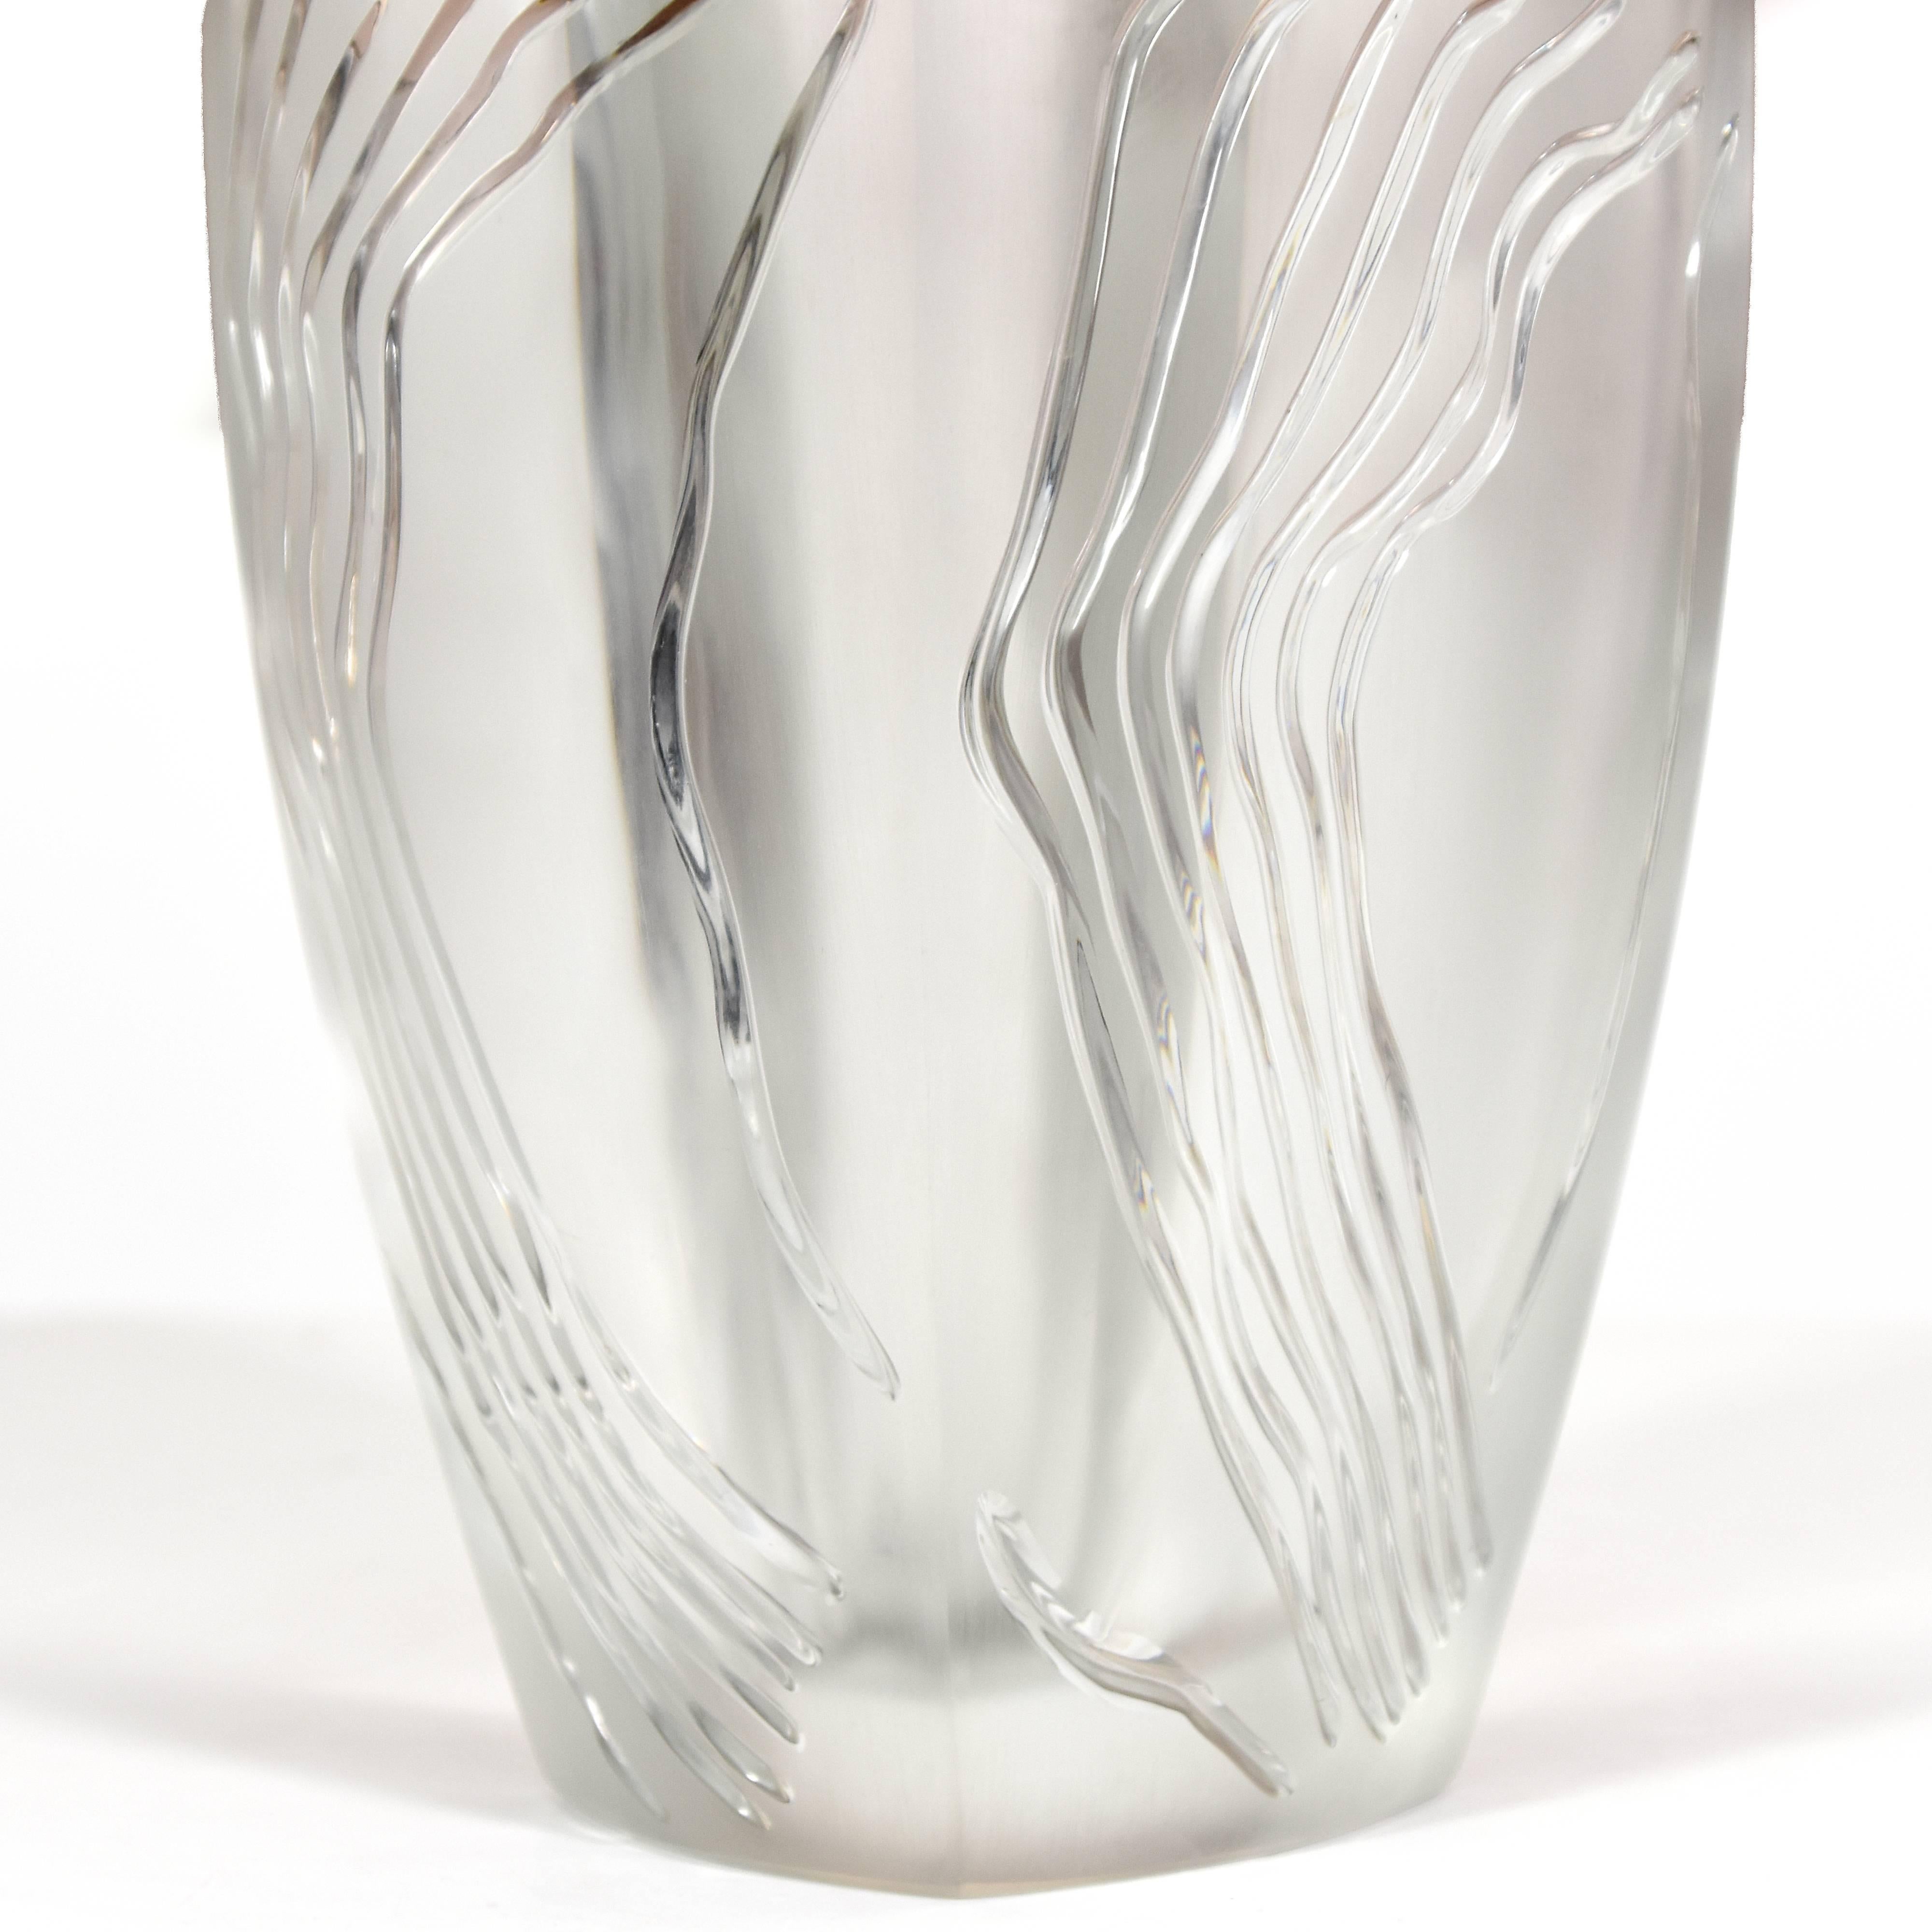 Molded Lalique Limited Edition 'Yasna' Vase with a Gold Detail, circa 2000 For Sale